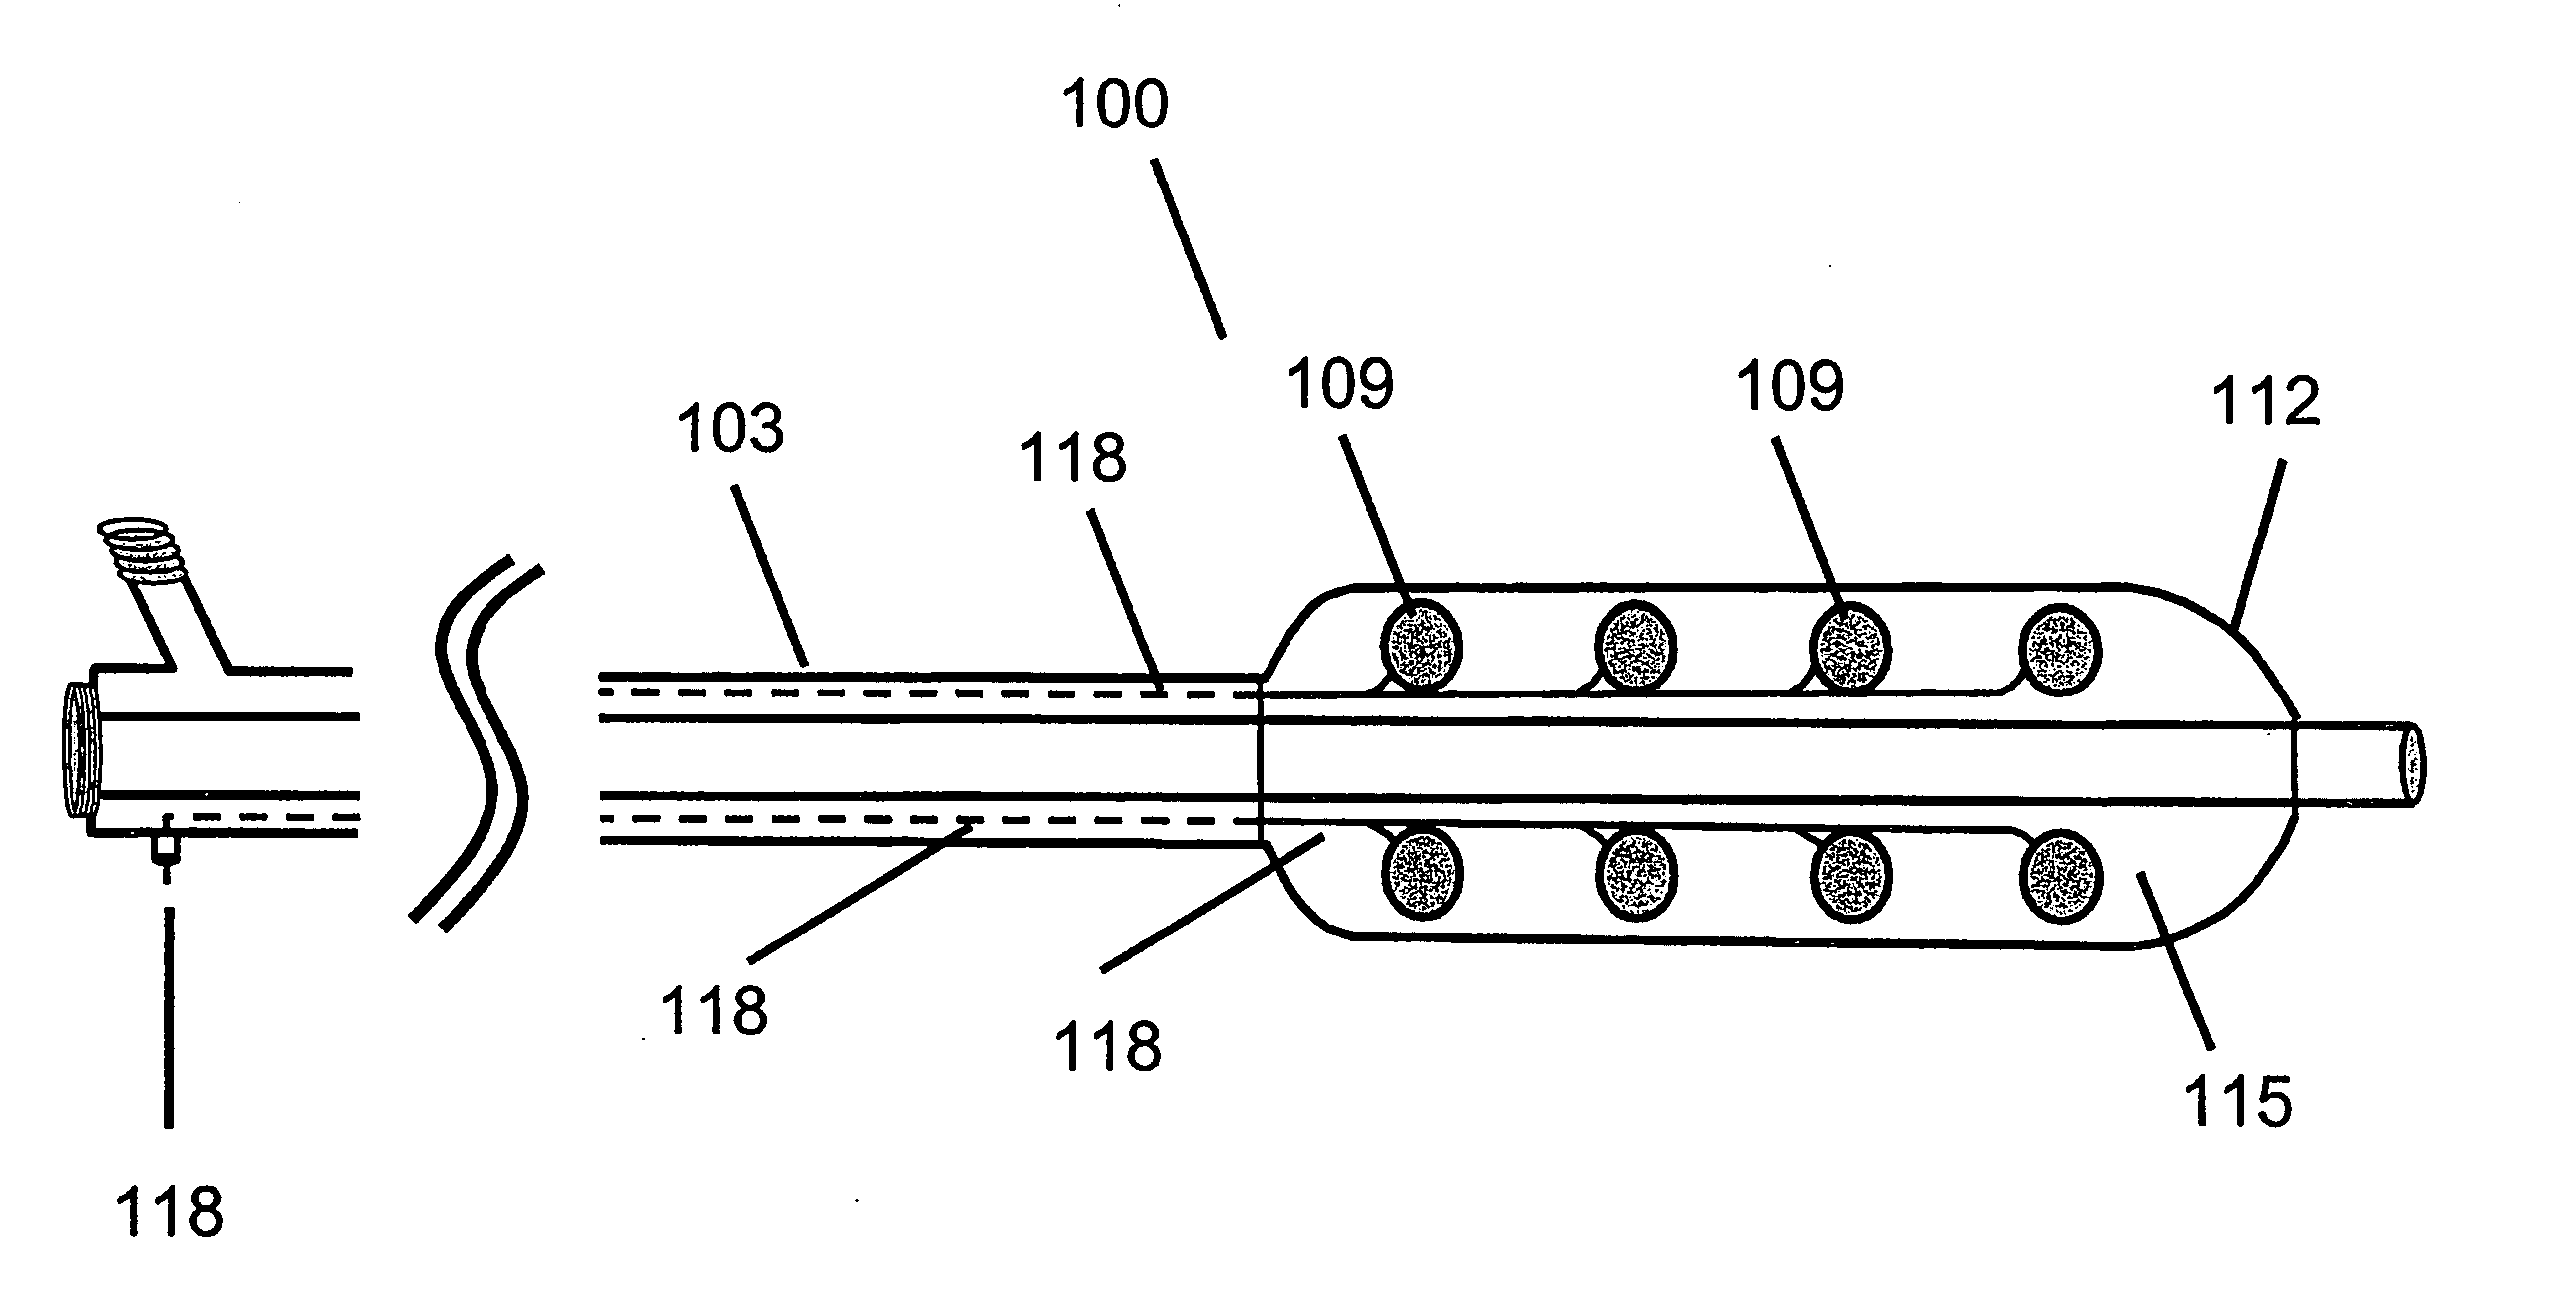 Angioplasty device with embolic recapture mechanism for treatment of occlusive vascular diseases